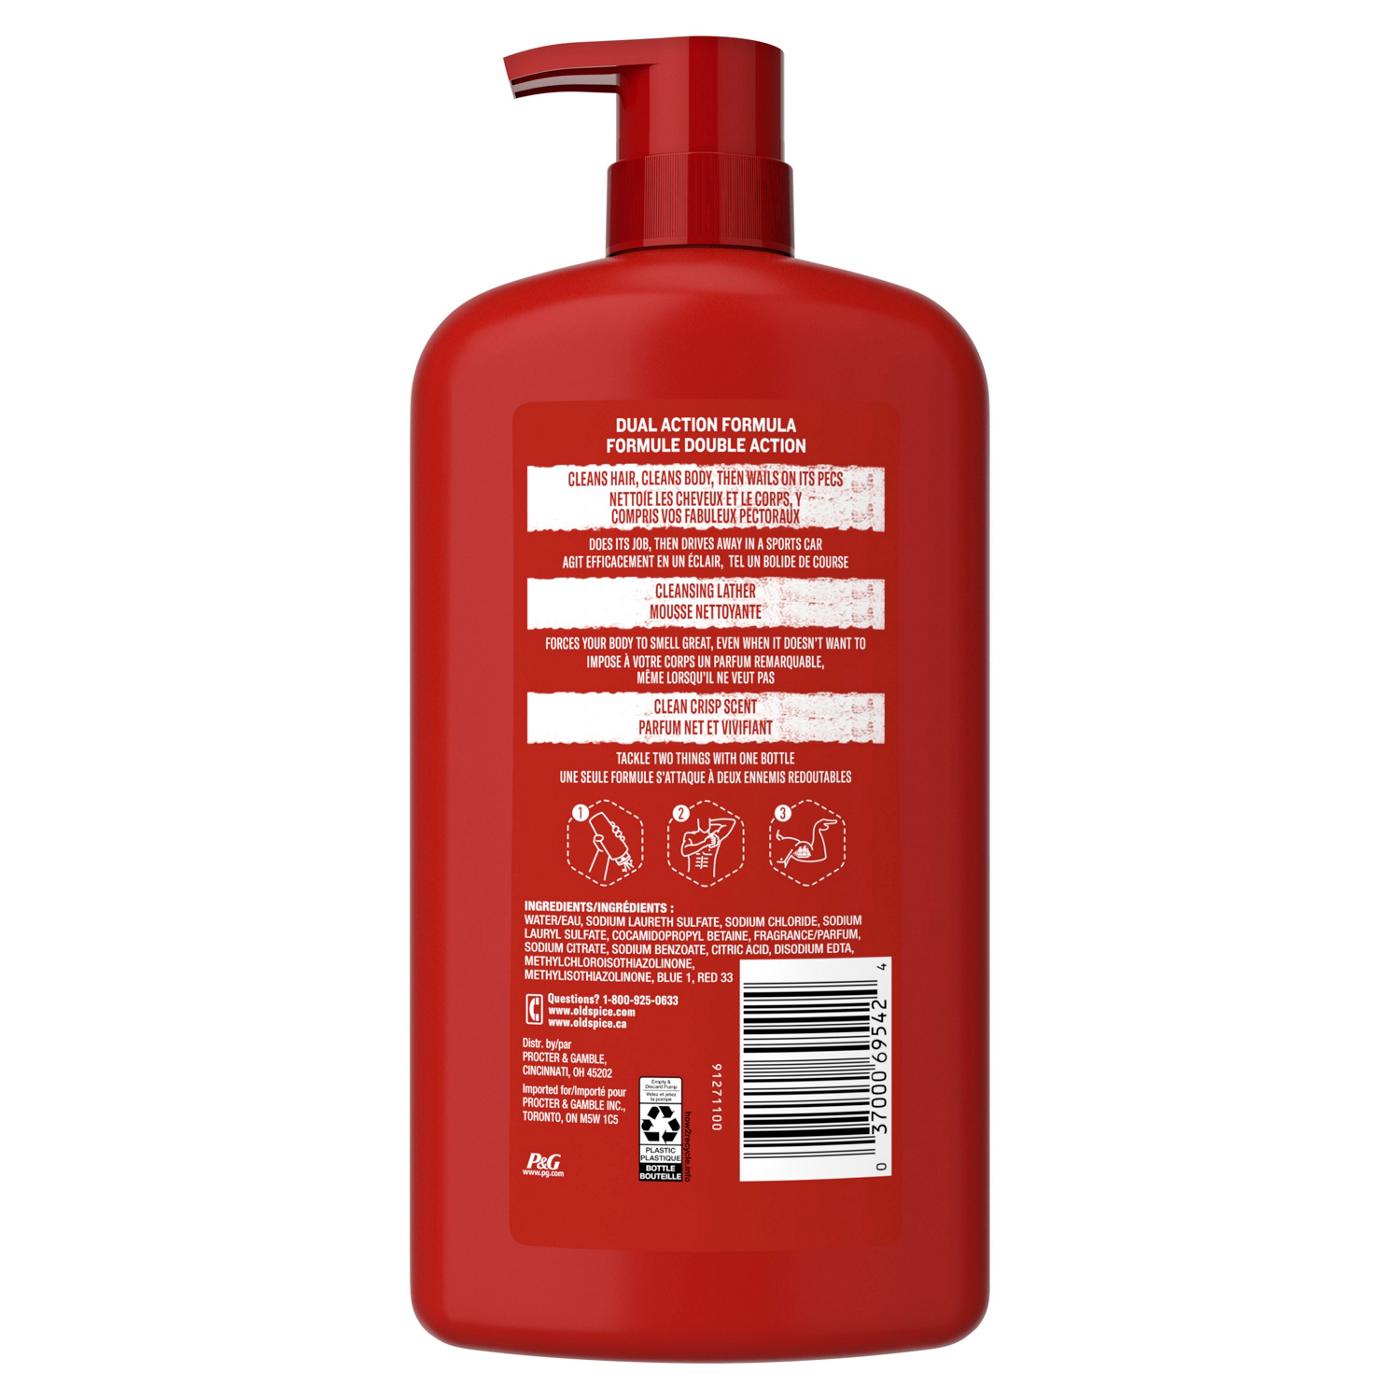 Old Spice 2 in 1 Hair & Body Wash; image 2 of 2